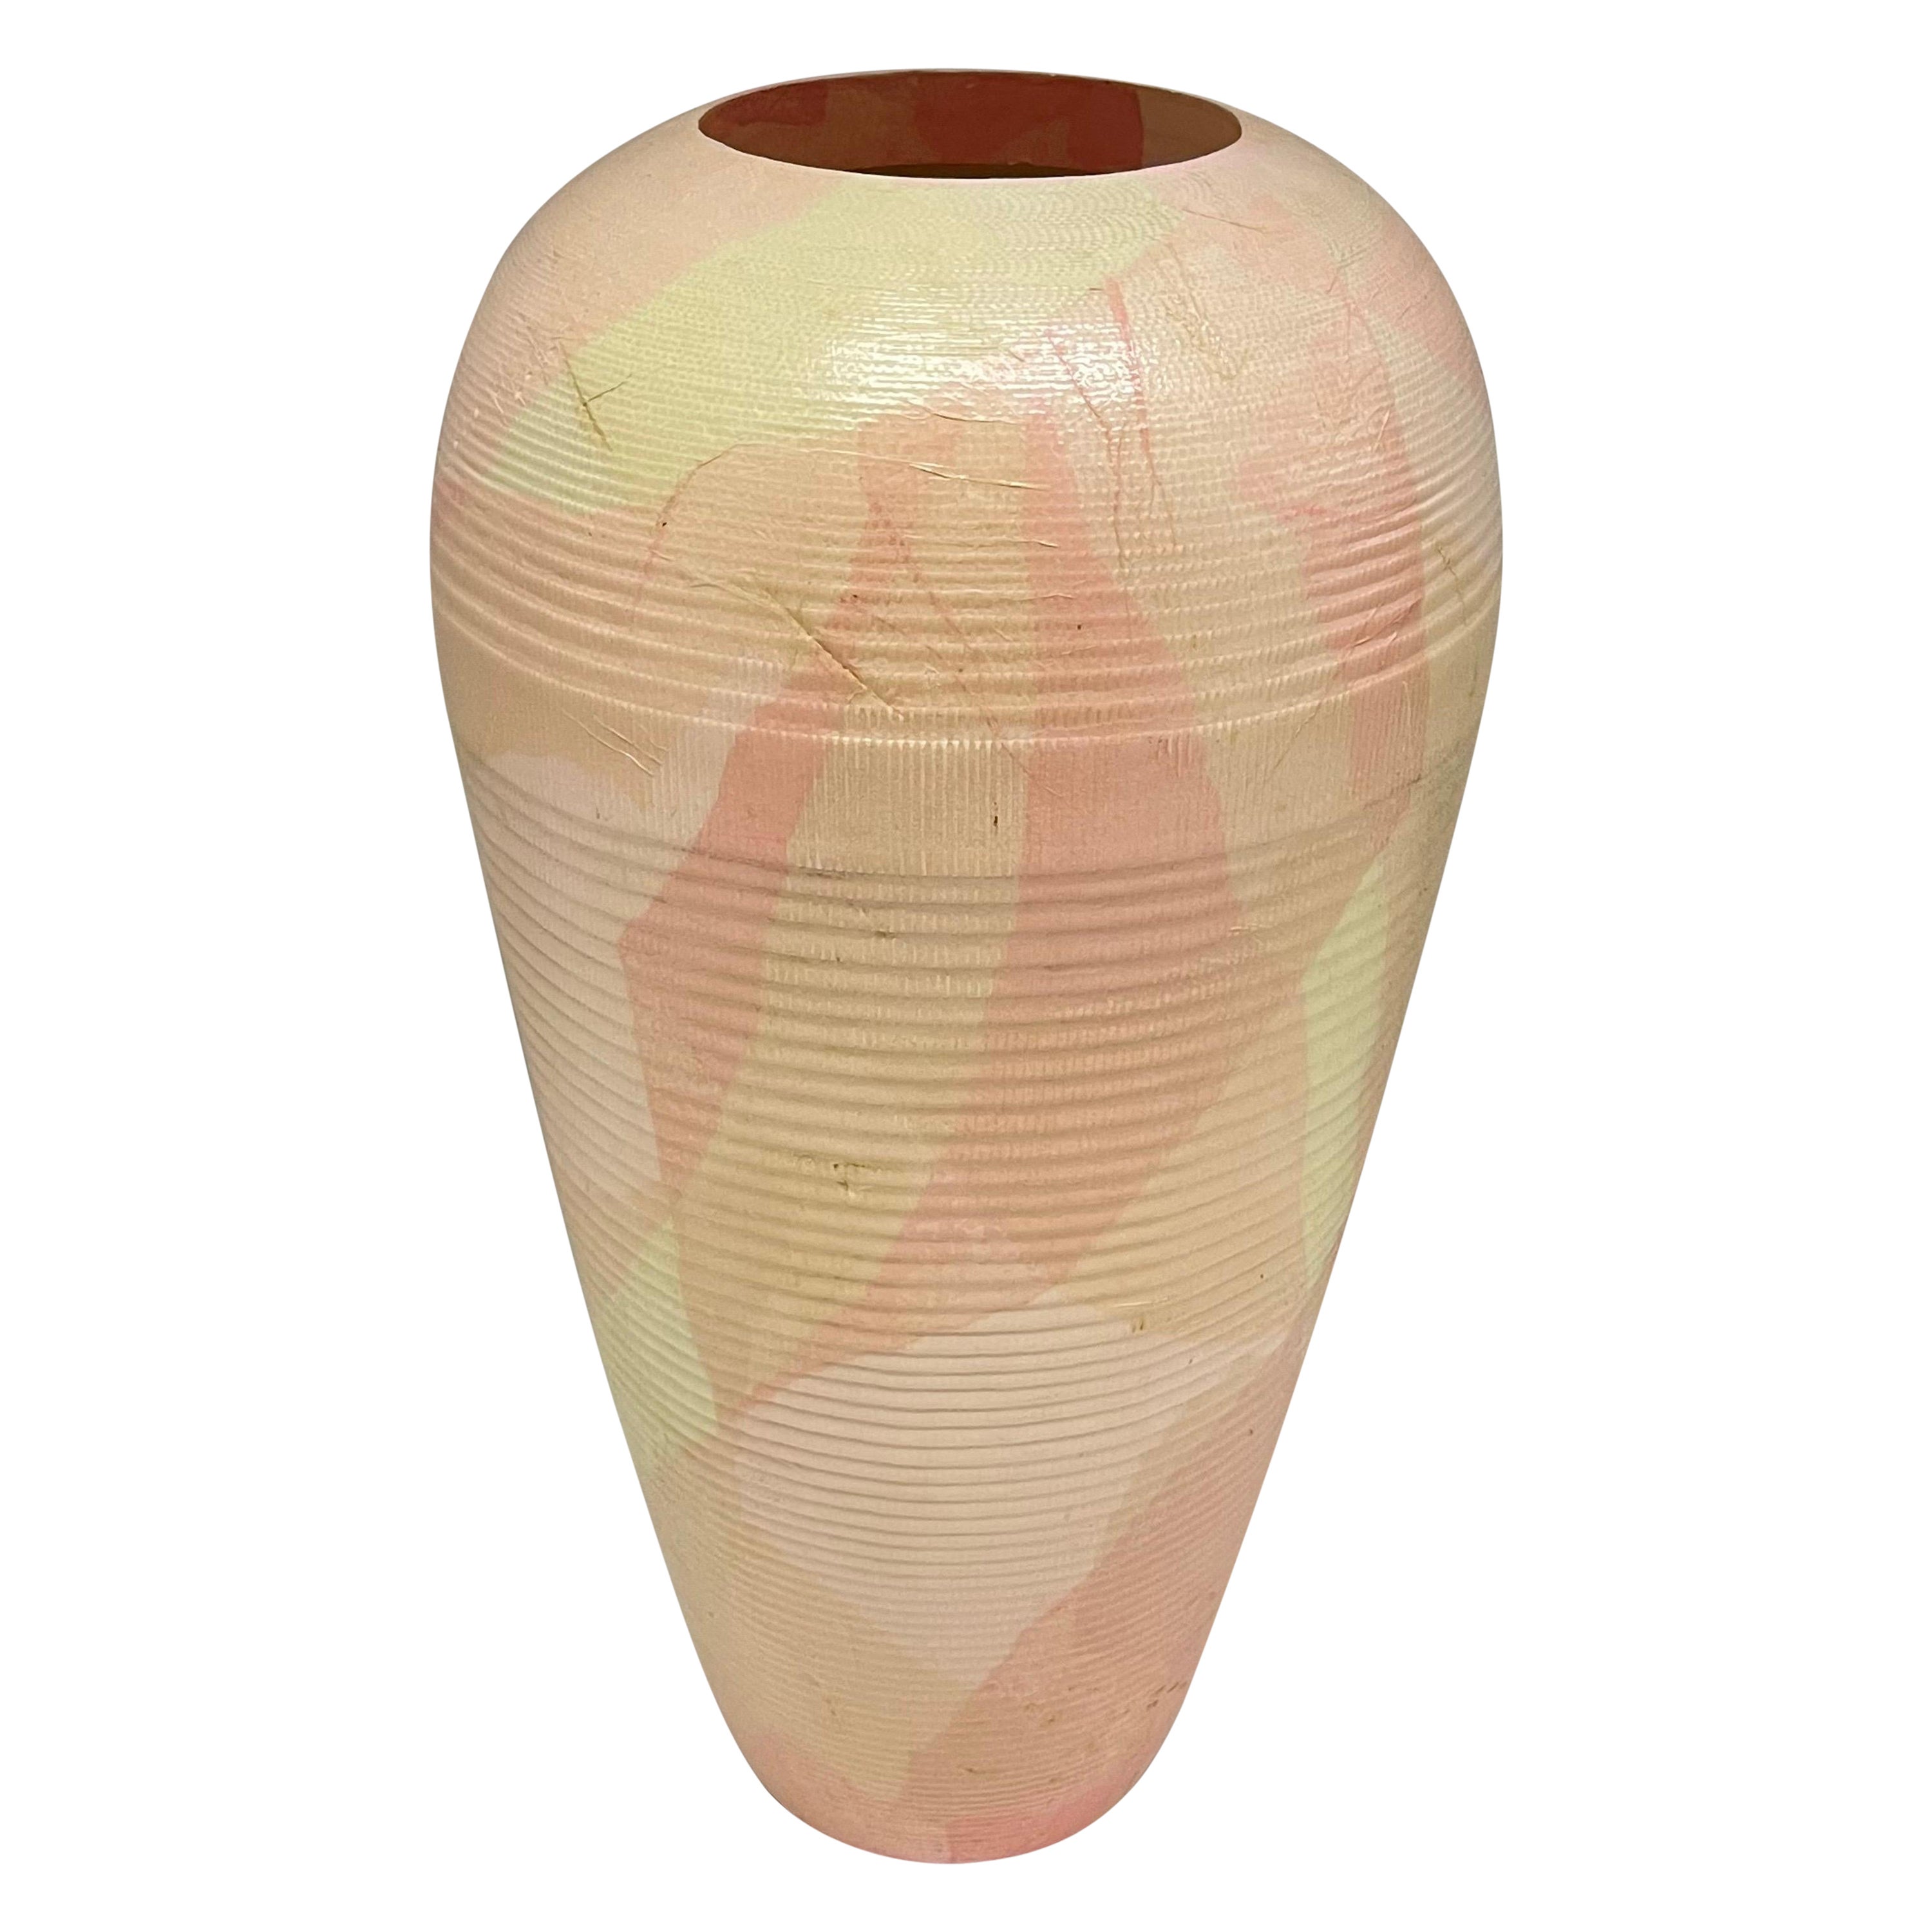 Post Modern Hand Painted Corrugated Cardboard Vase by Flute, Chicago, c 1989 For Sale